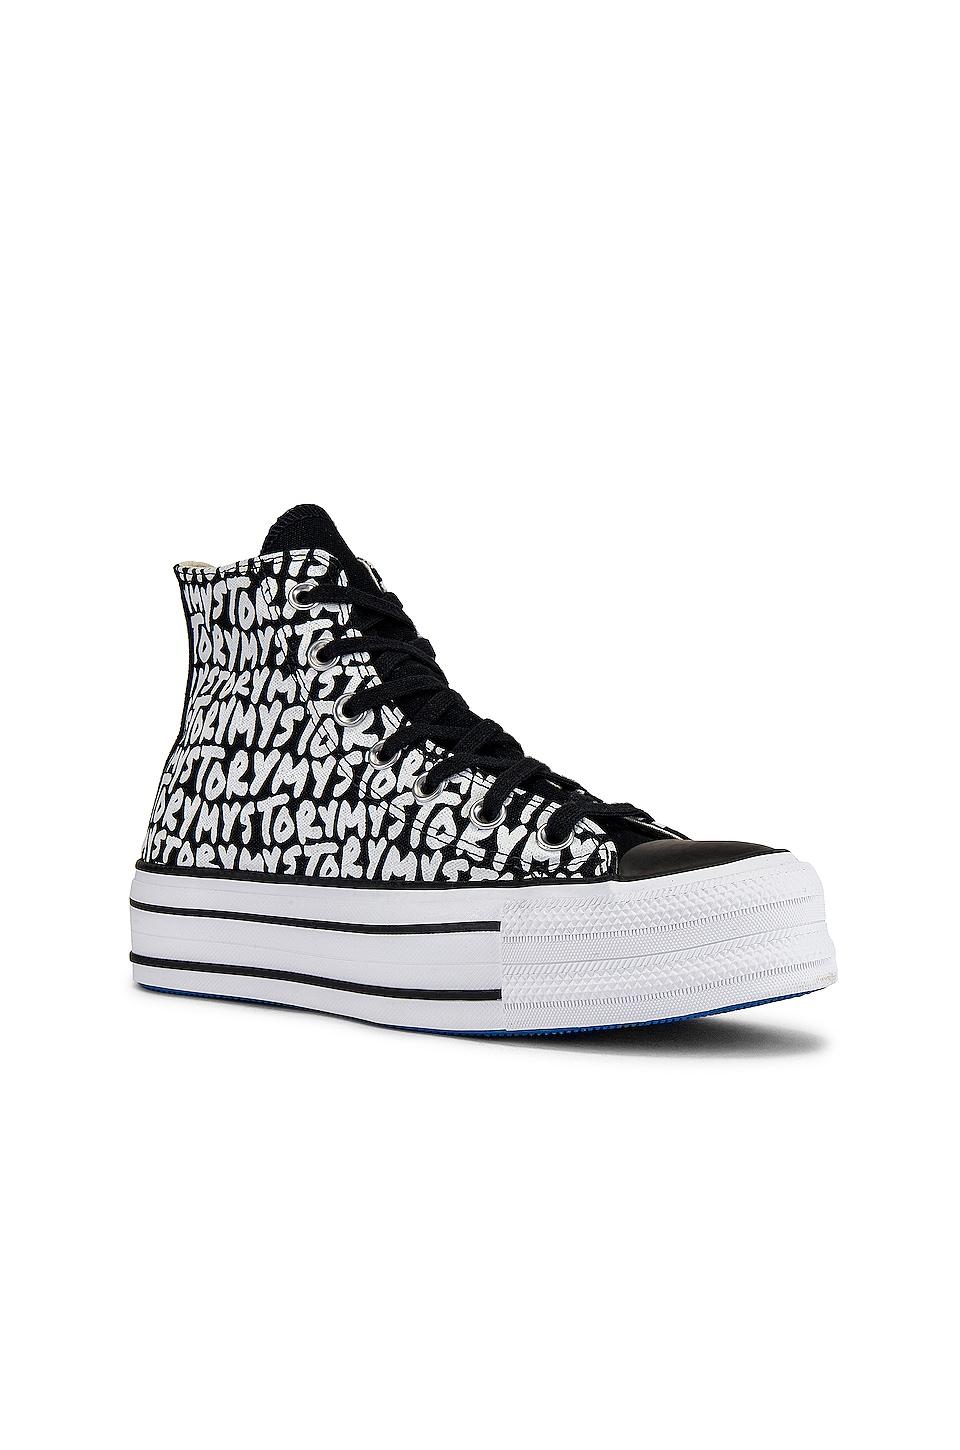 Converse Chuck Taylor All Star Platform My Story Sneaker in Black | Lyst